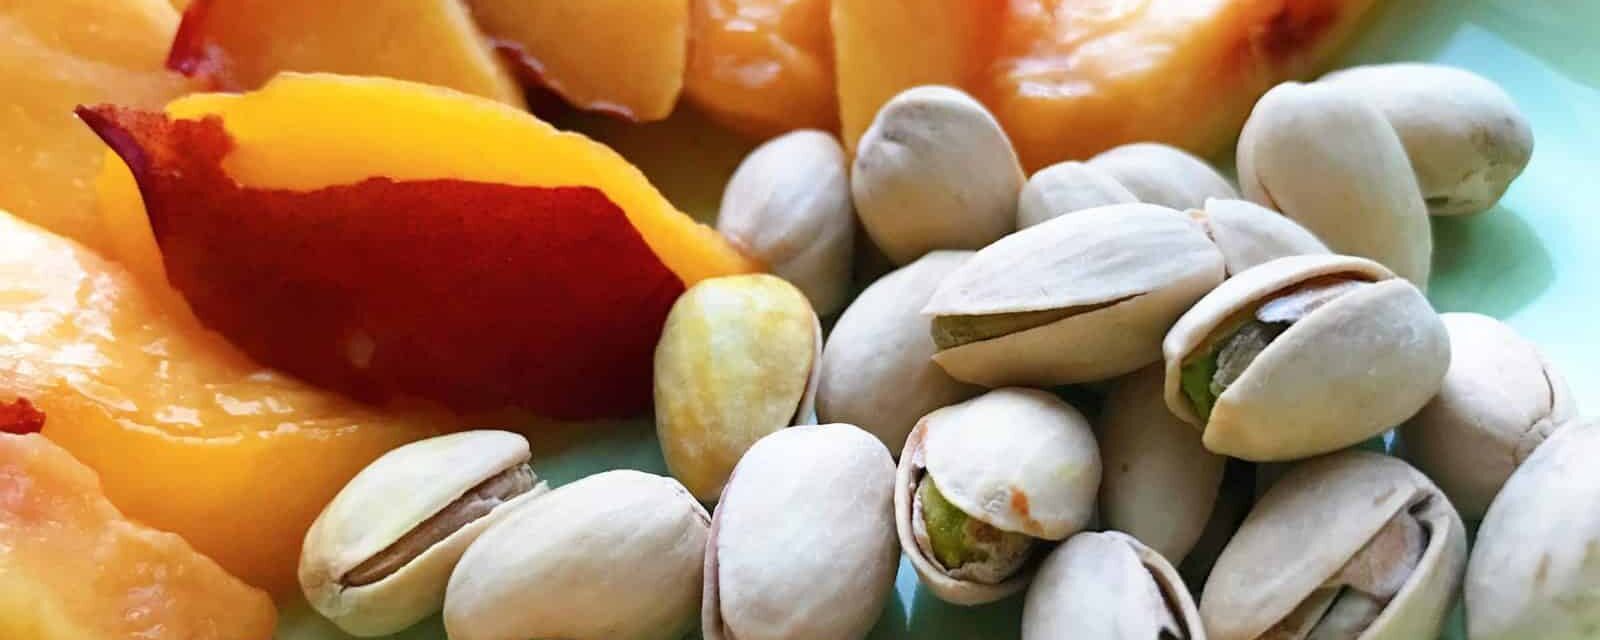 CARE Snack: Fresh Peaches and Pistachios